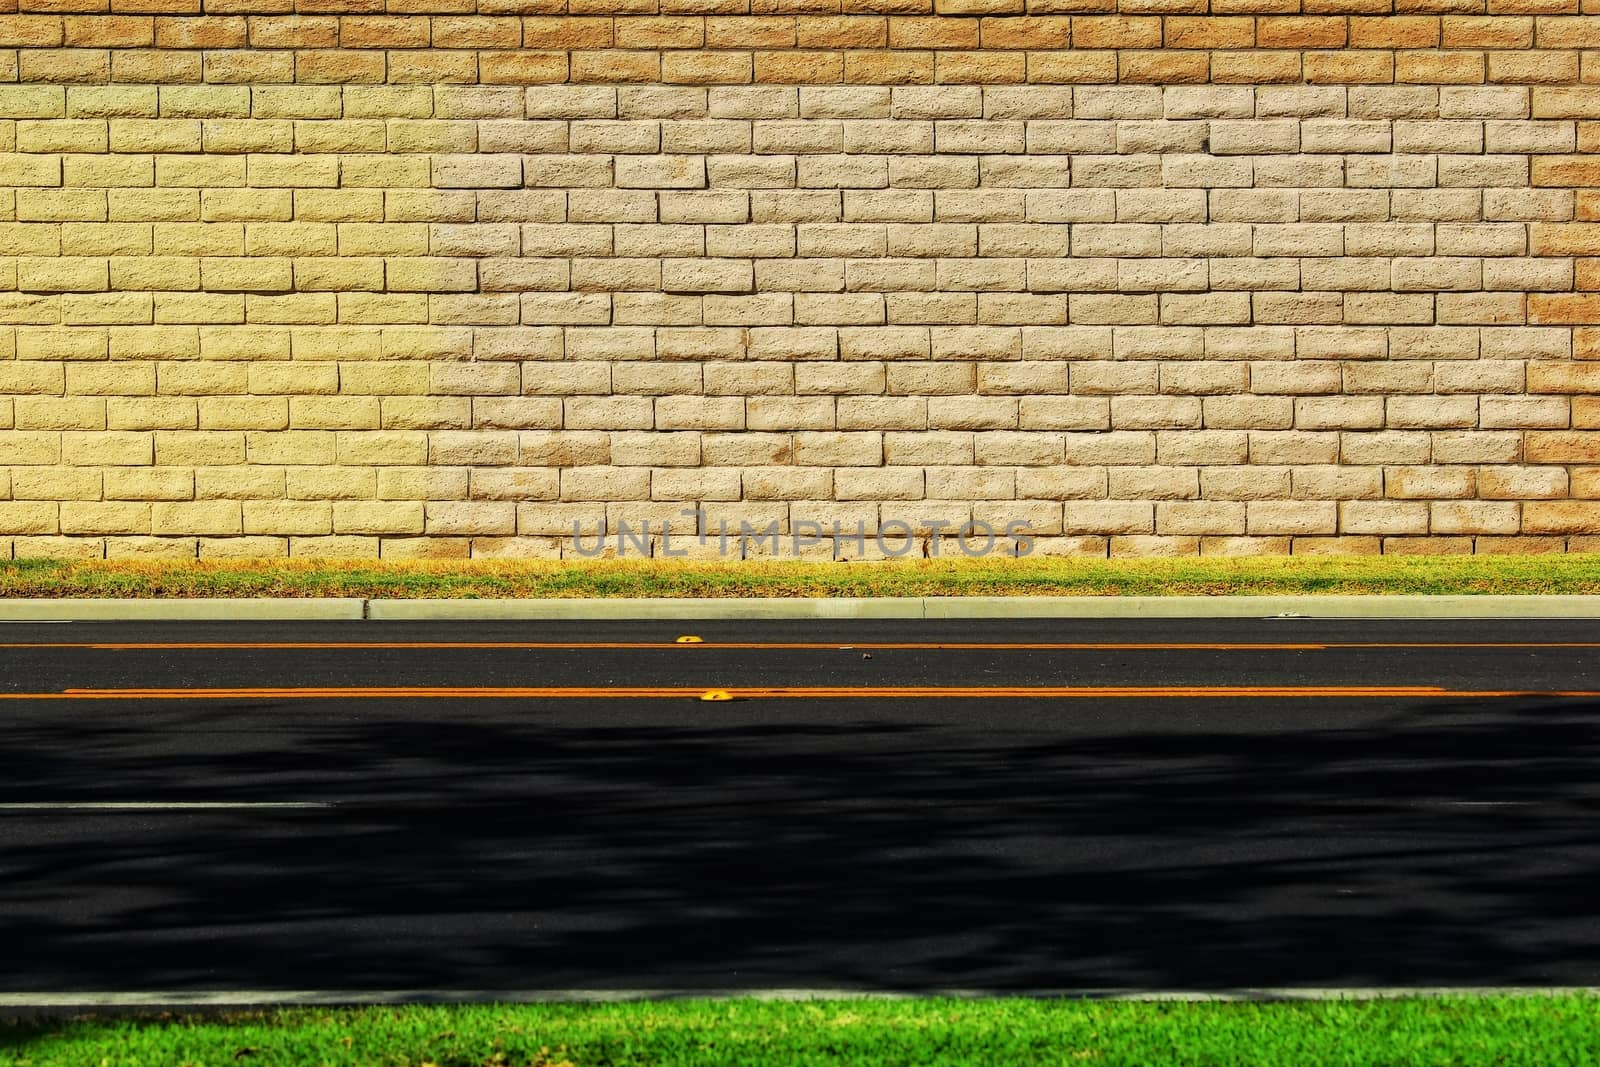 Empty road with brick wall background and green grass.